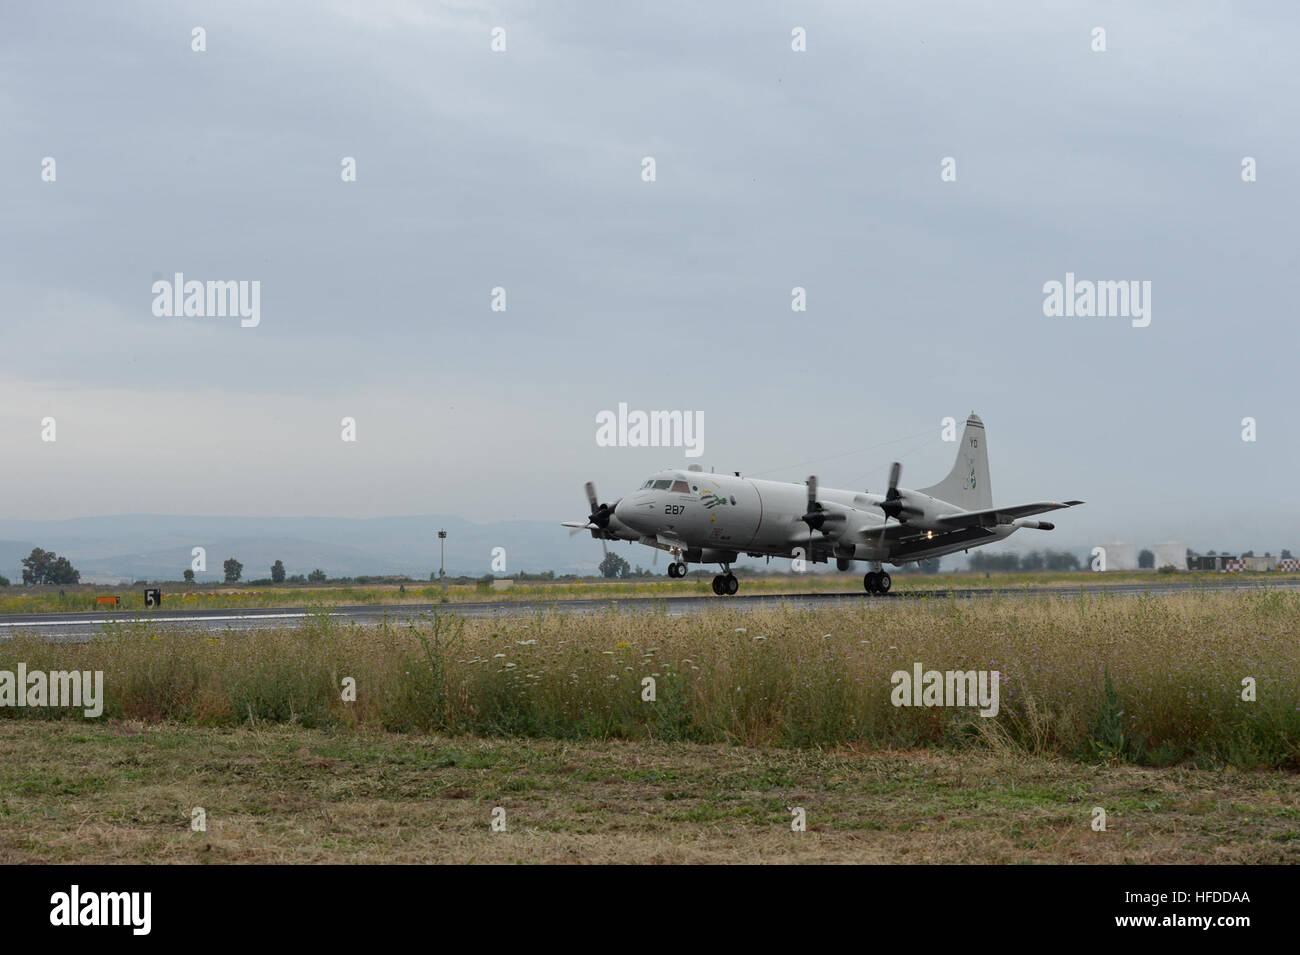 160519-N-YZ751-115   SIGONELLA, Sicily (May 19, 2016) A P-3 Orion maritime patrol aircraft from Patrol Squadron (VP) Four taxis at Naval Air Station Sigonella, Sicily in preparation to take off in support of the search for Egyptair flight MS804.  The U.S. Navy is providing a P-3 Orion in support of the Hellenic Armed Forces, the Joint Rescue Coordination Center in Greece, in response to a request by the U.S. Embassy in Athens, Greece for assistance in the search of the missing Egyptian aircraft. (U.S. Navy photo by Mass  Communication Specialist 1st Class Tony D. Curtis/Released) U.S. Navy P-3 Stock Photo